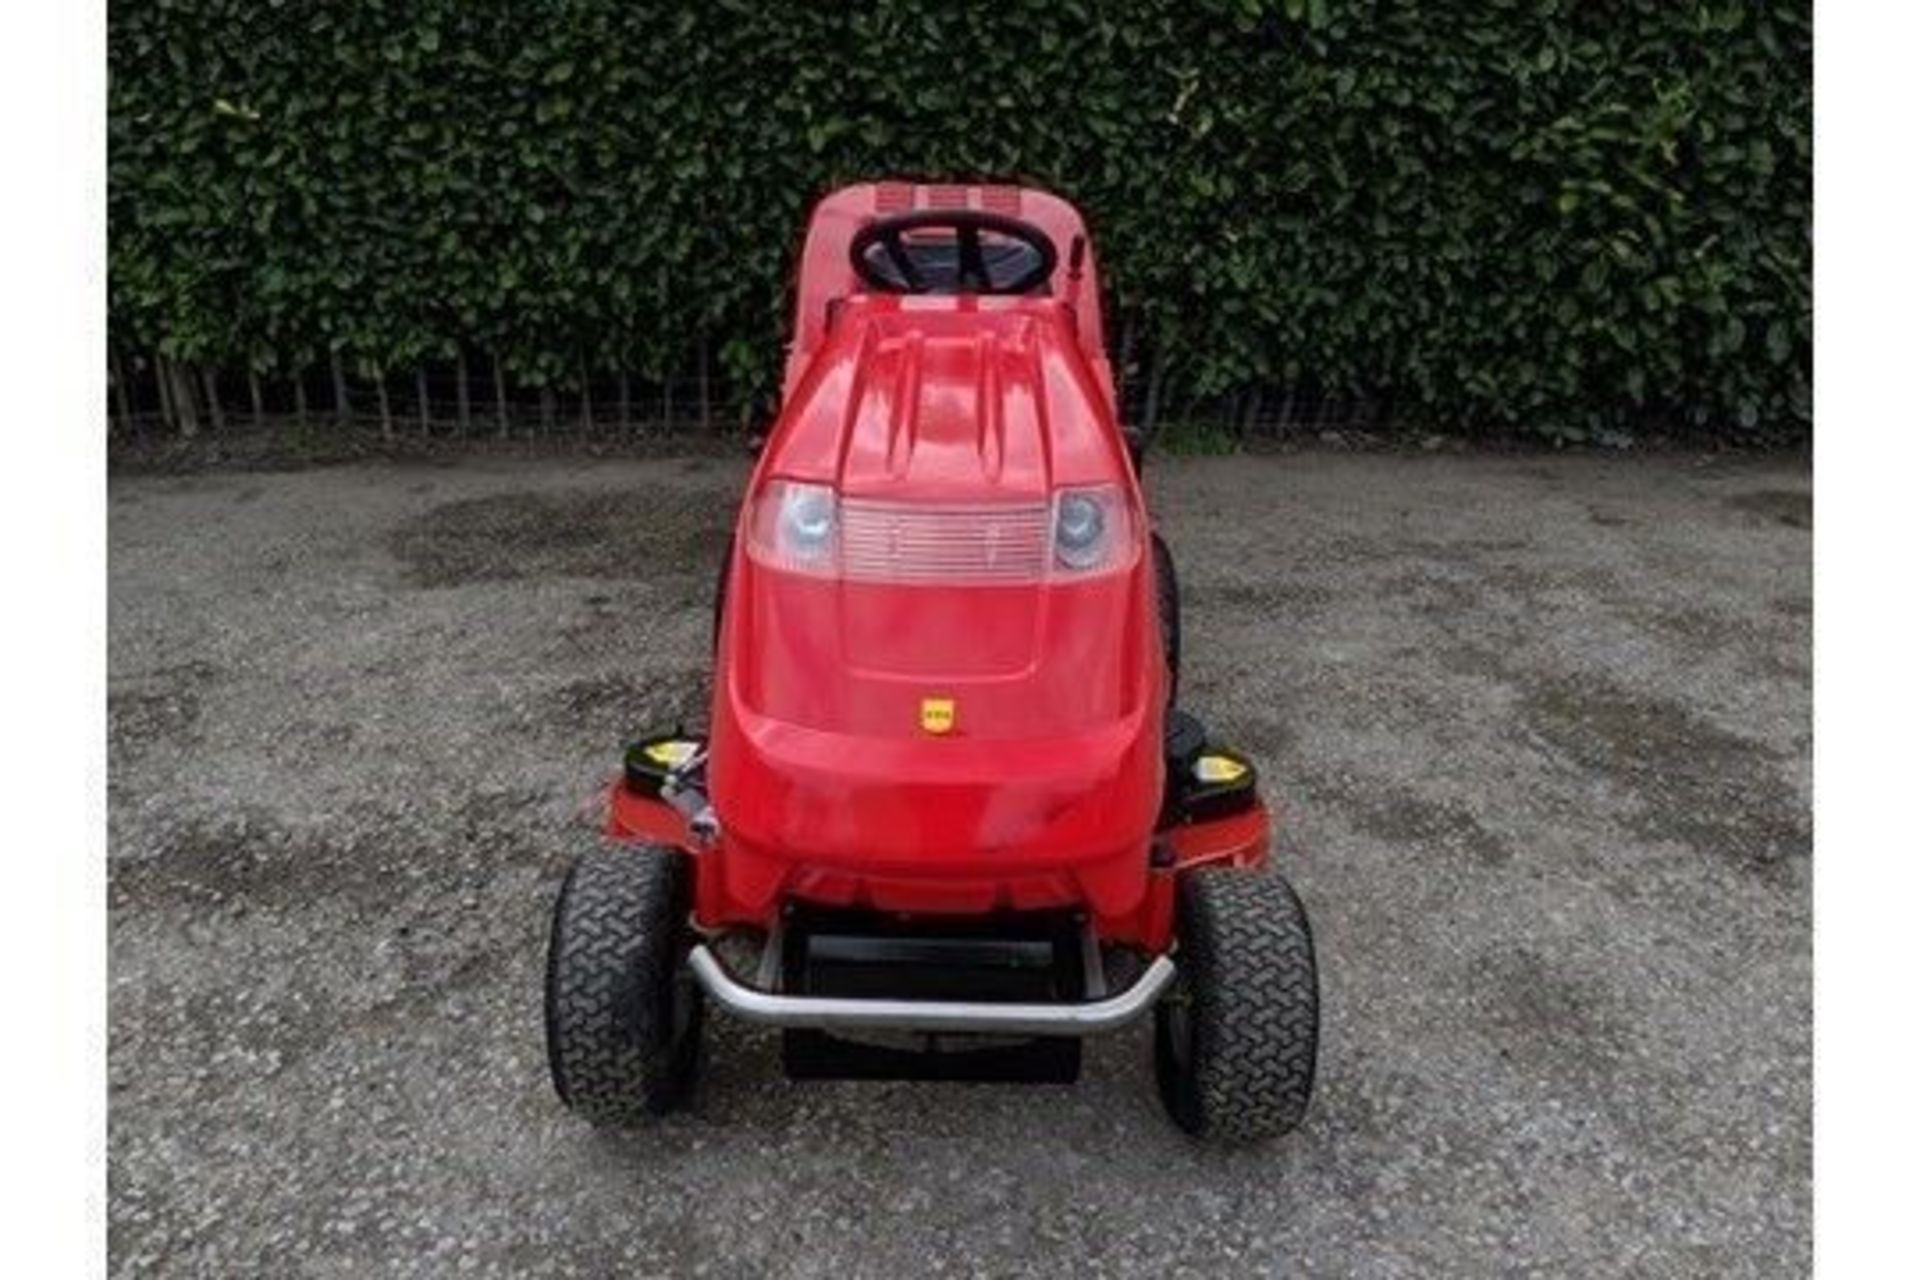 Countax C600HE 44" Rear Discharge Garden Tractor With PGC - Image 2 of 6